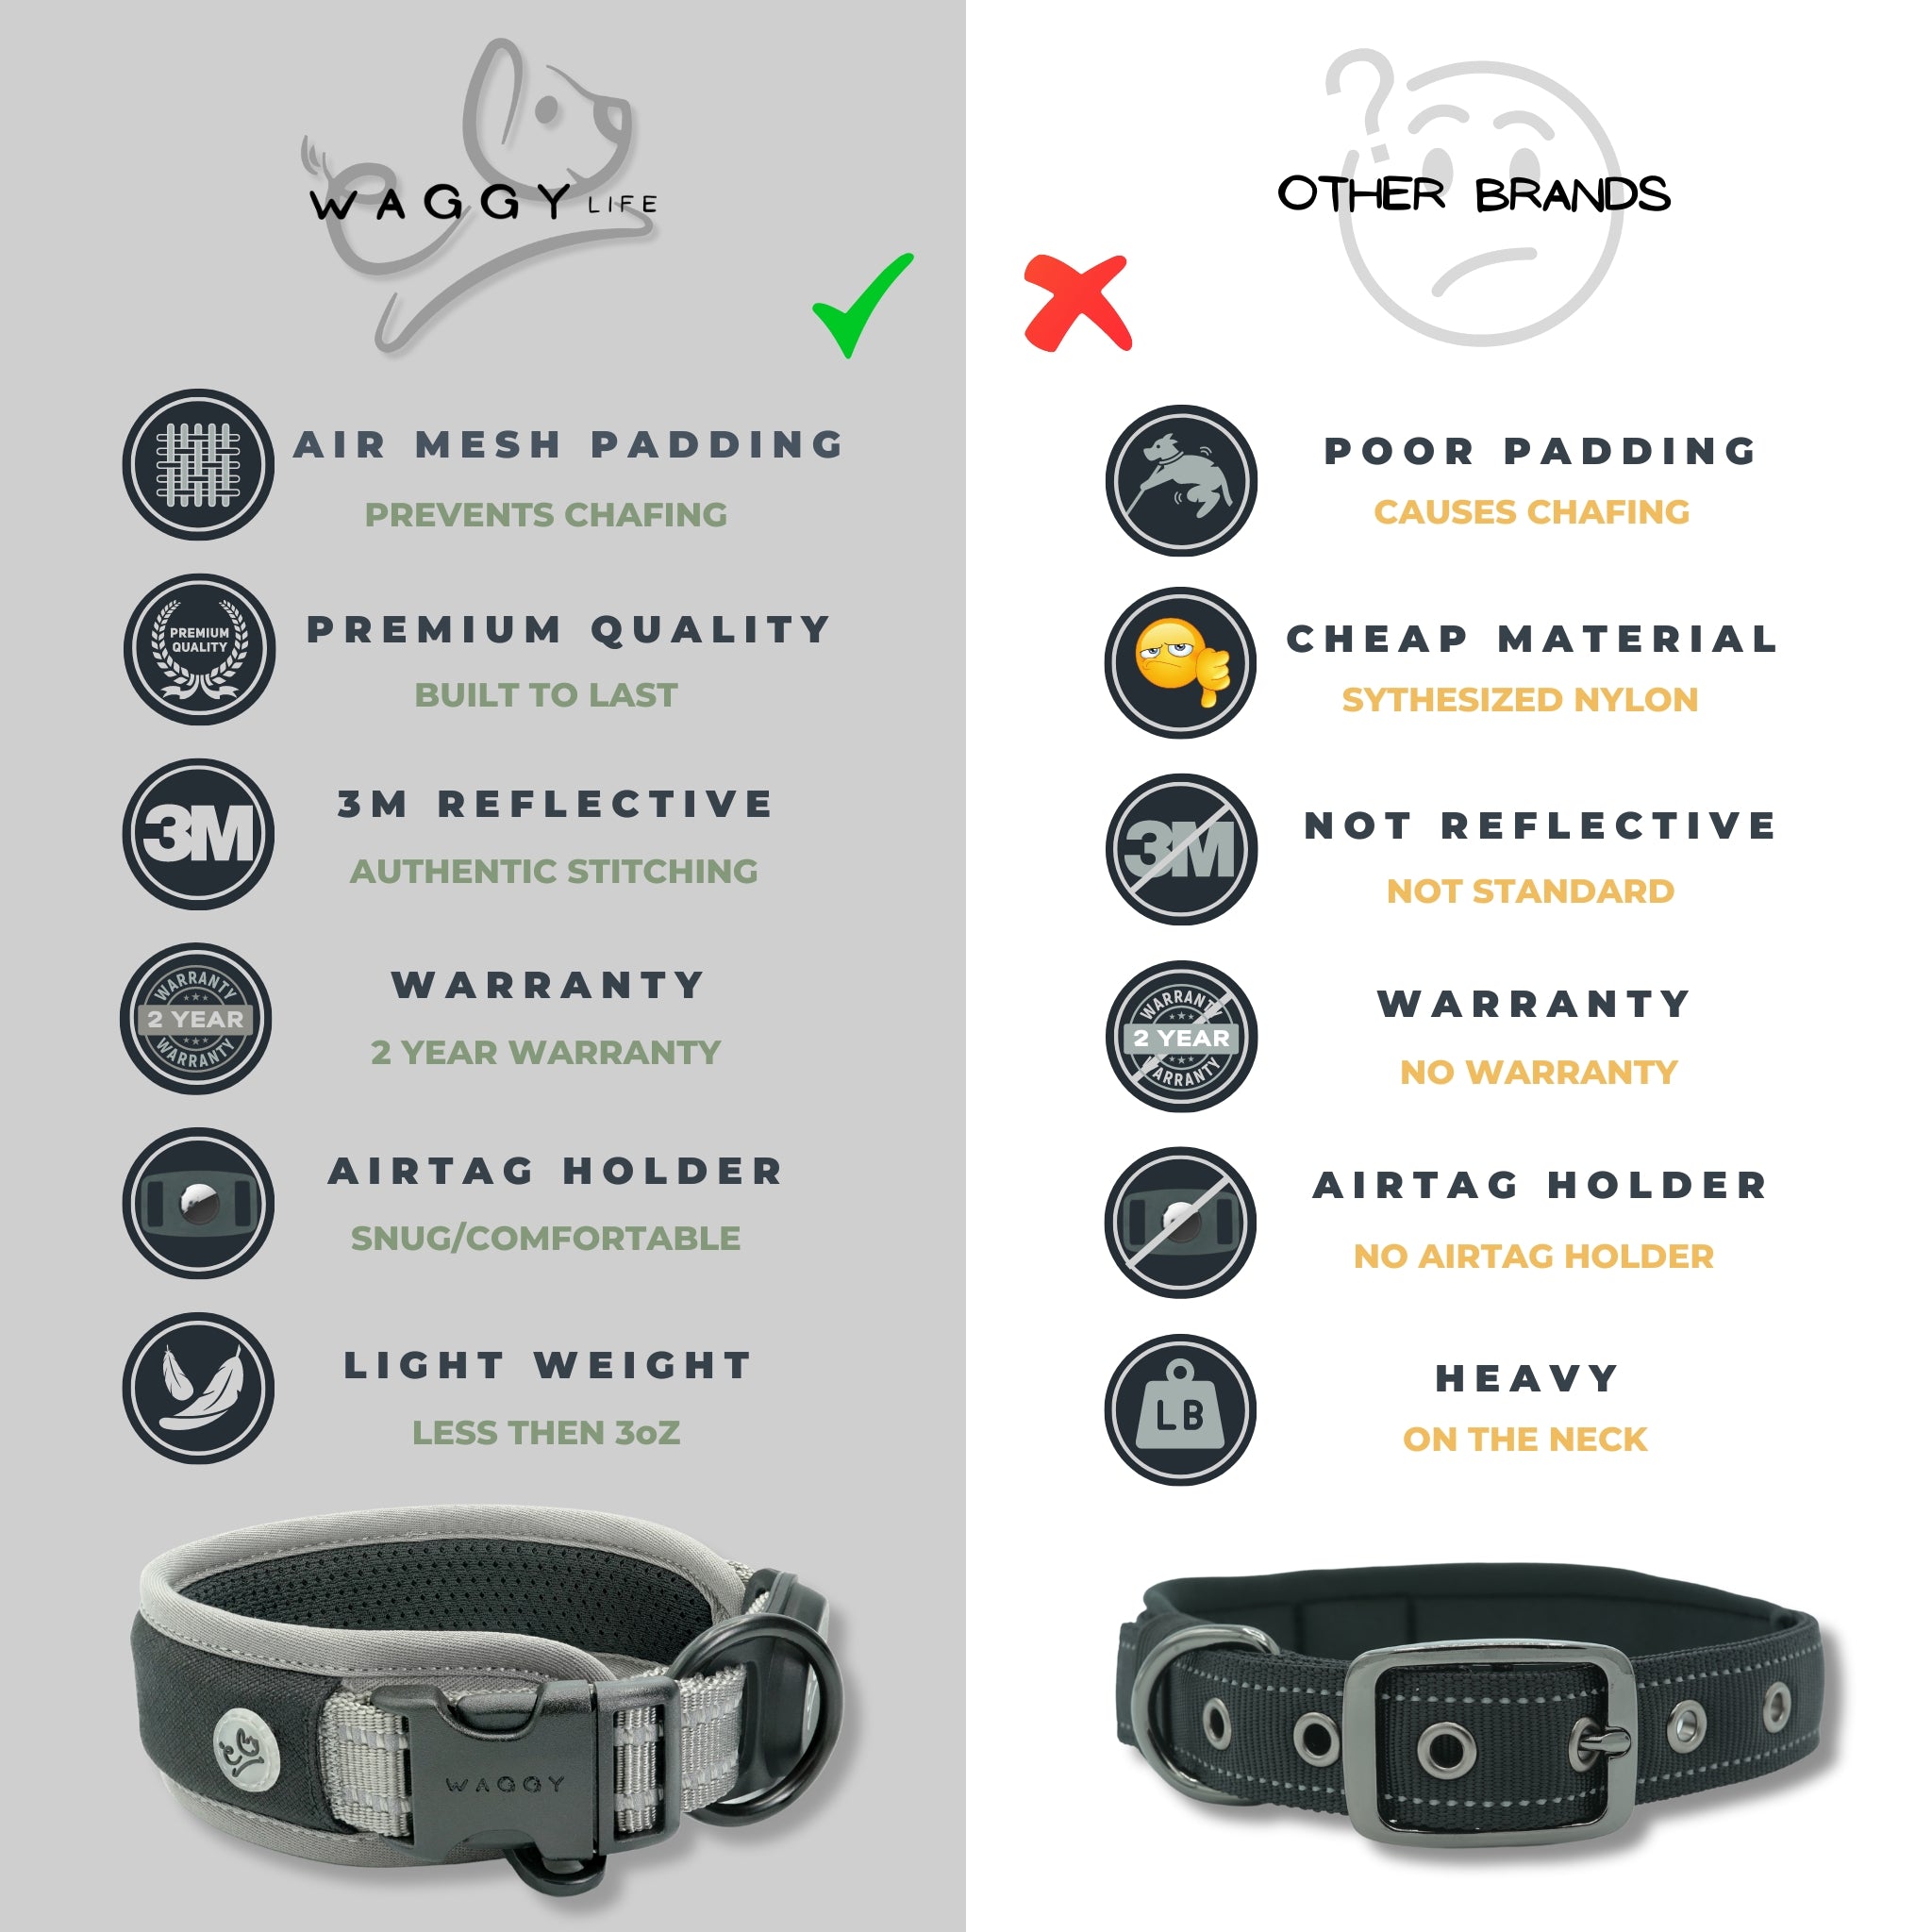 Grey Air Mesh dog collar comparative chart showing a comparison view from other brand collars. 6 icons showing all the features and comparing them to other brand collars. Prevents chafing; built to last; authentic 3M stitching, 2 year warranty; airtag holder that is snug/comfortable; light weight - less then 3oz. Compared to other brand; poor padding; cheap material; not standard reflective; no warranty; no Airtag holder; heavy on a dogs neck.